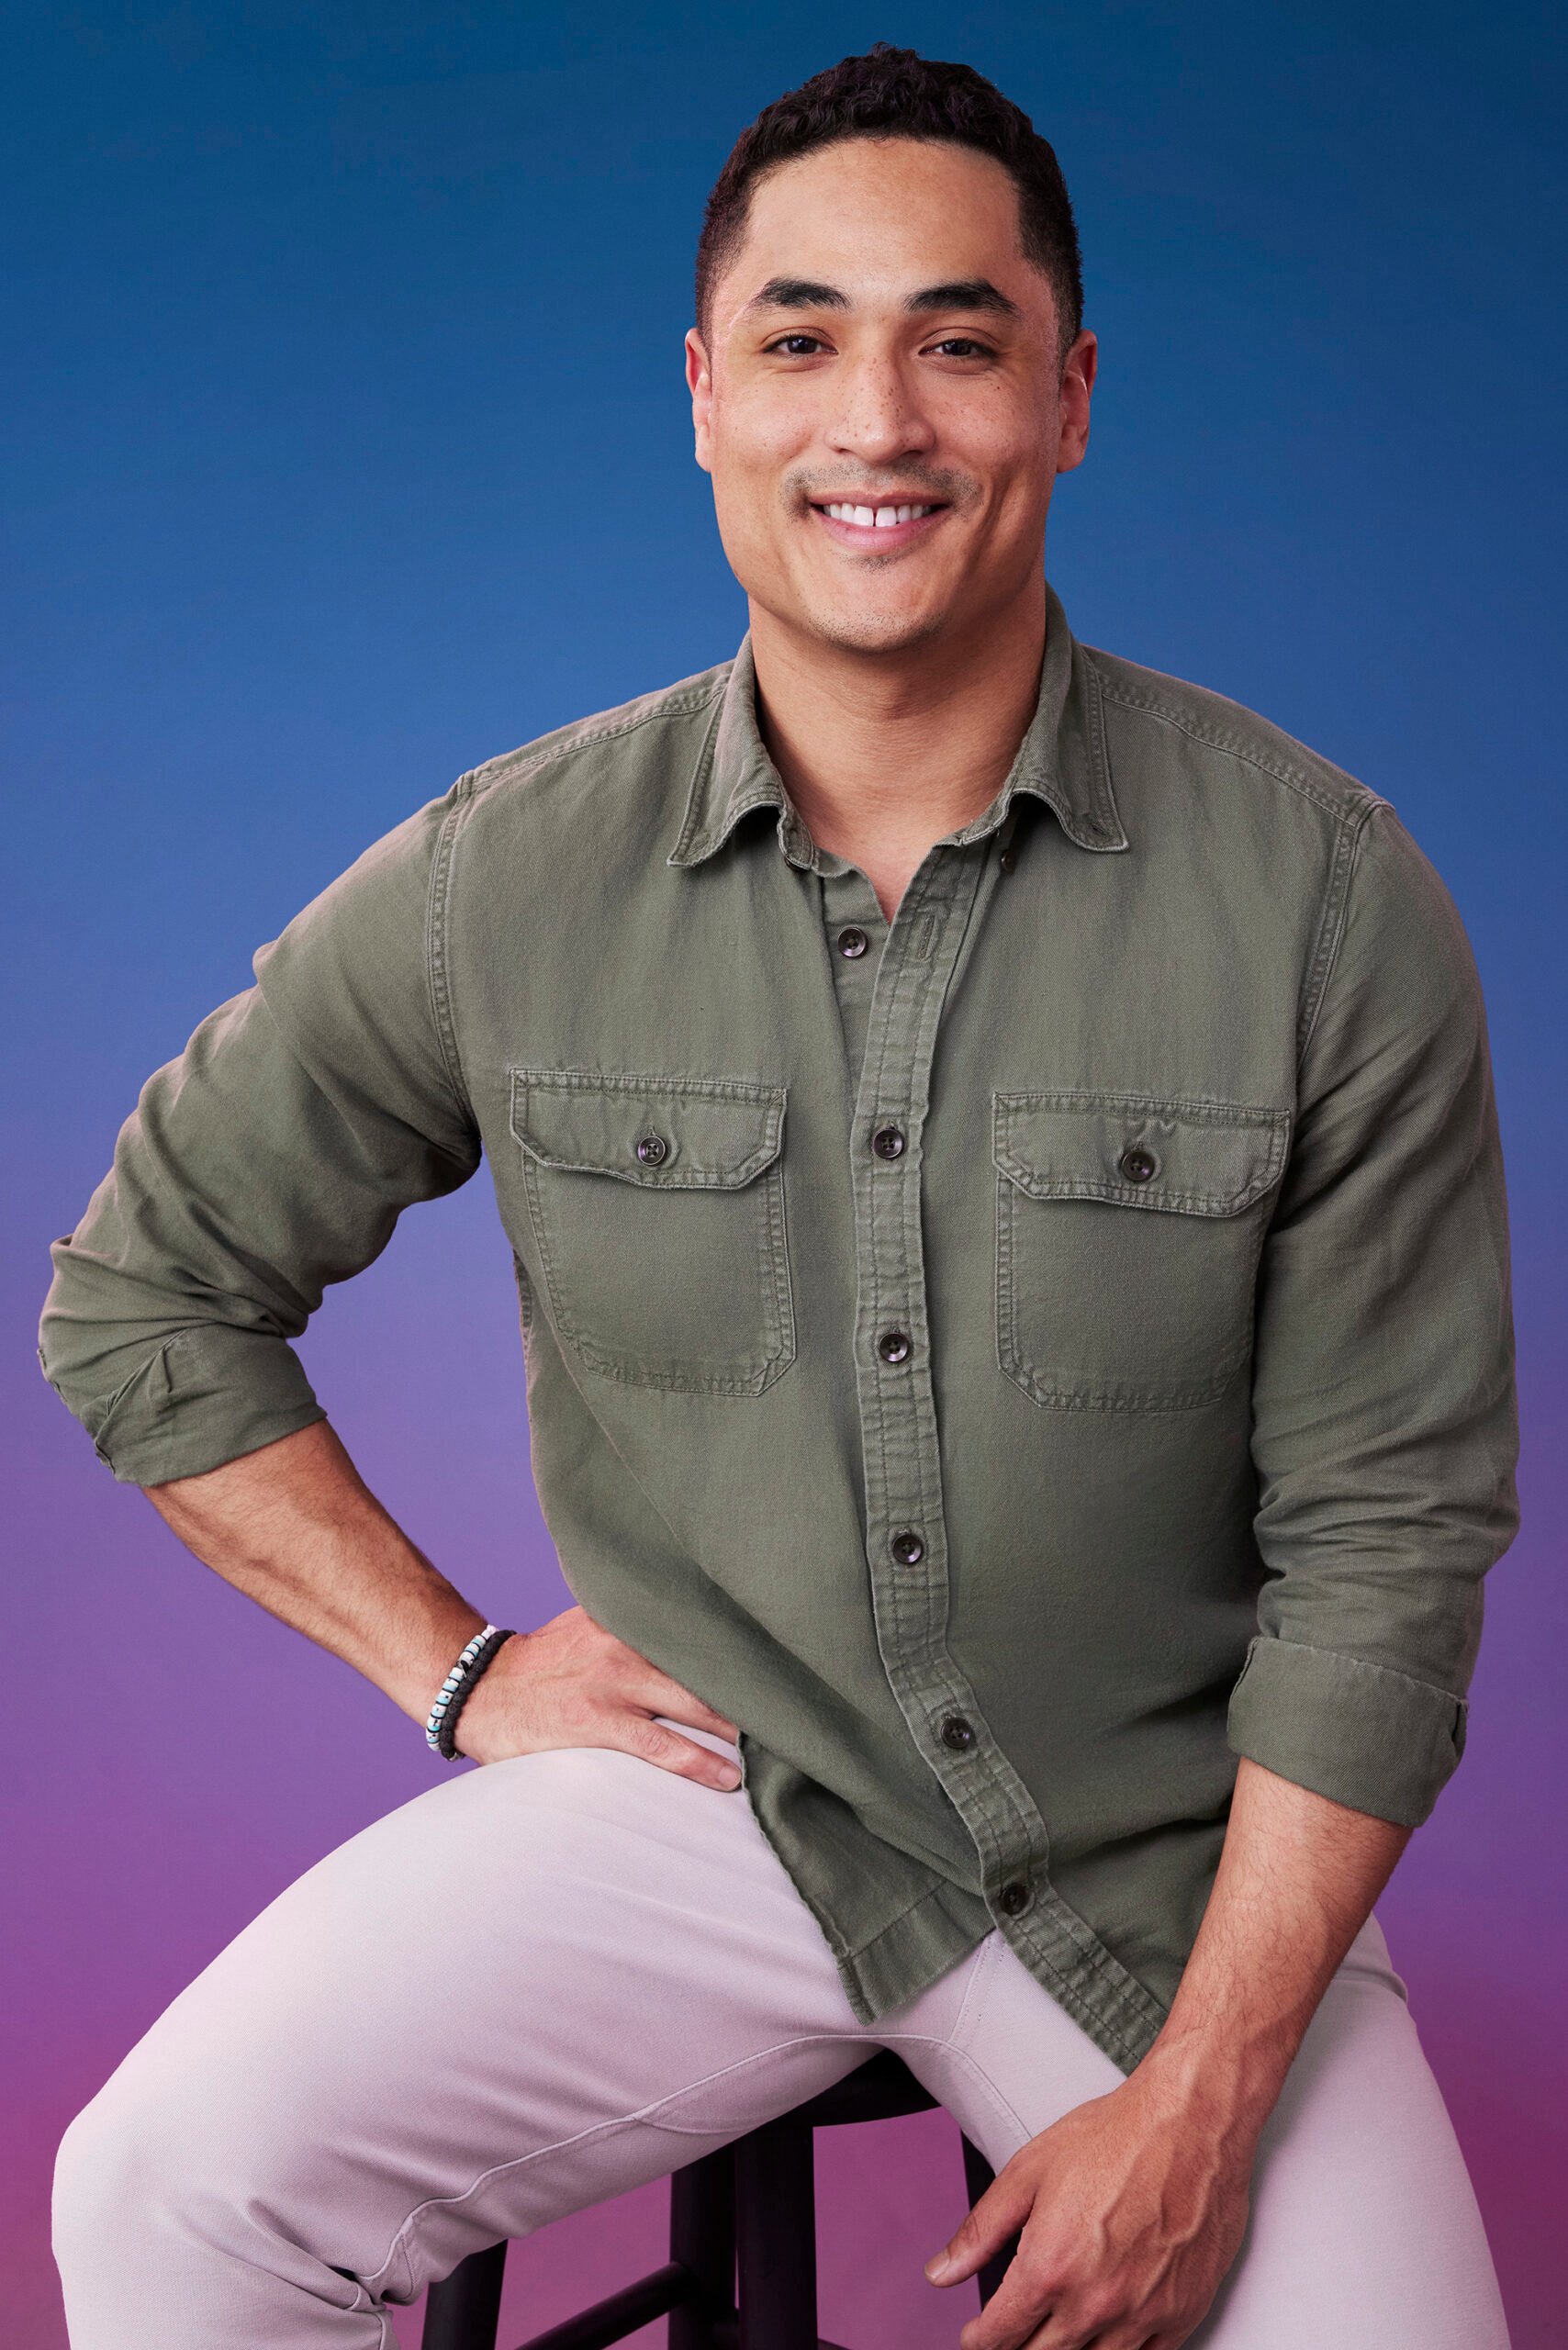 Marcus is a contestant on Season 21 of The Bachelorette.